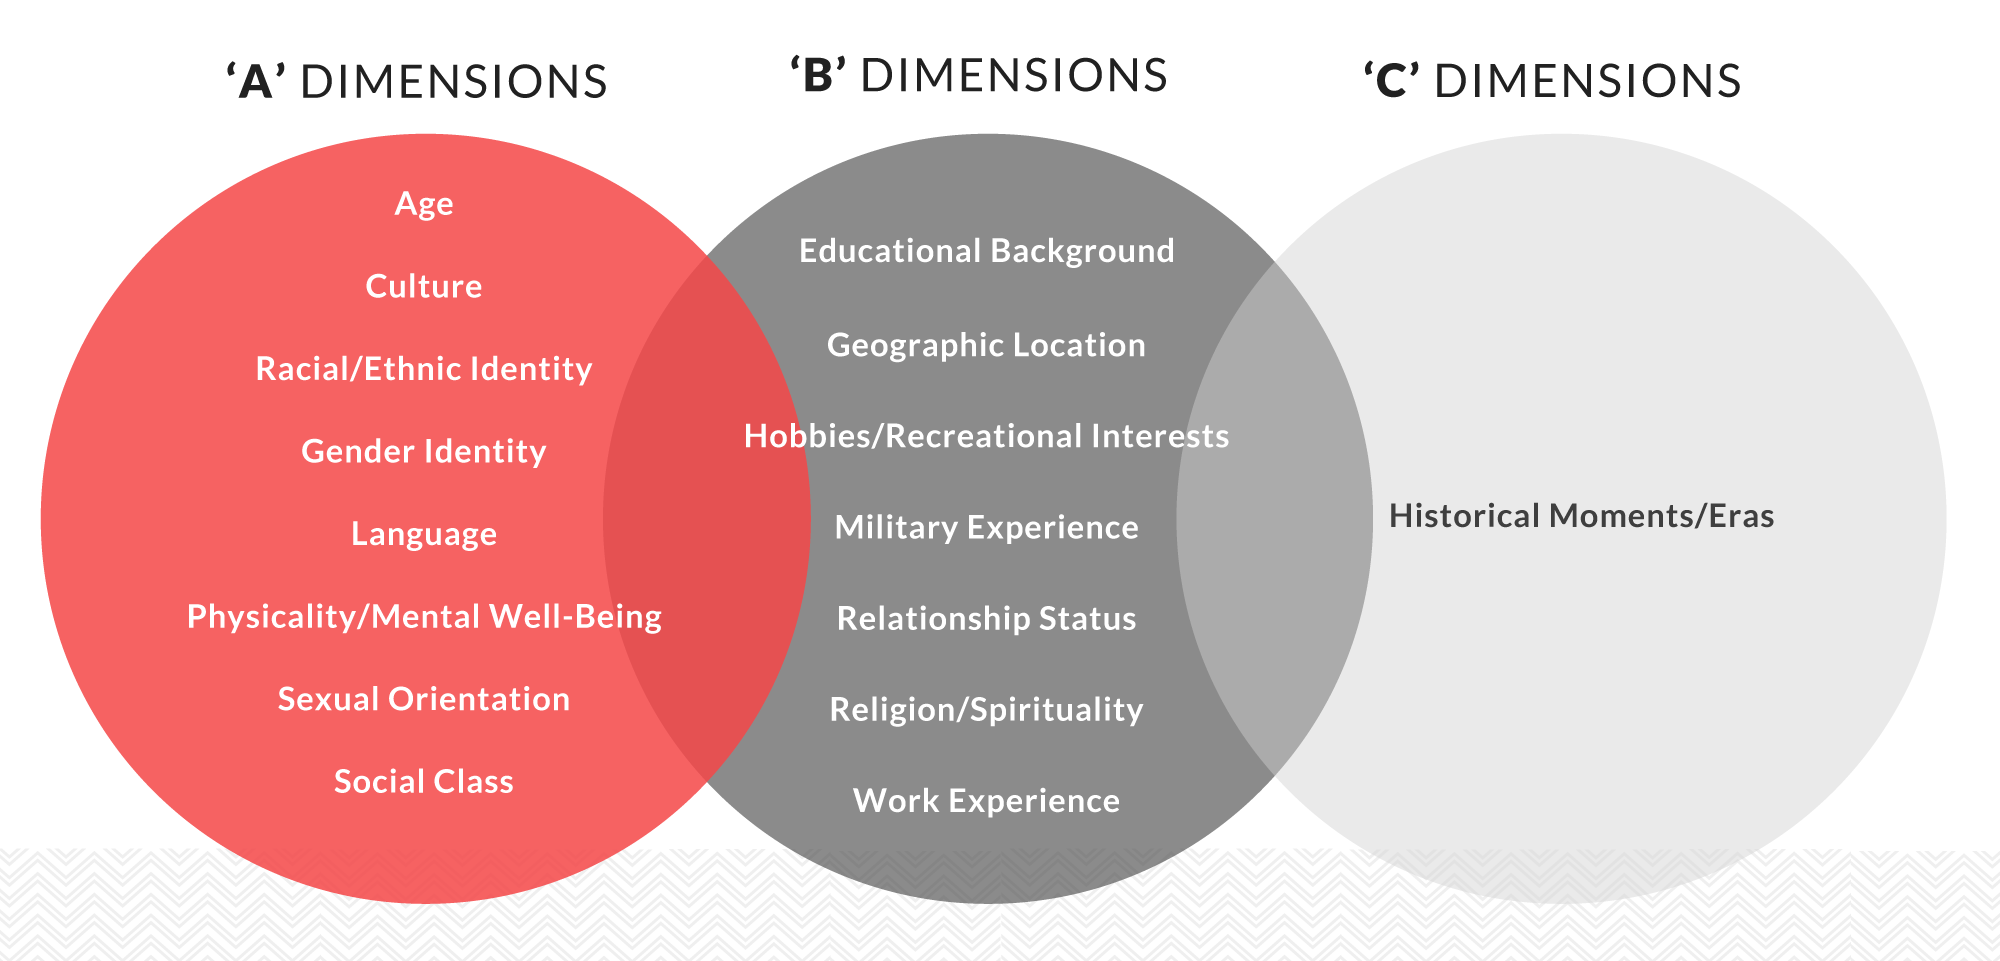 Venn diagram showing overlap among the A, B, and C dimensions of personal identity